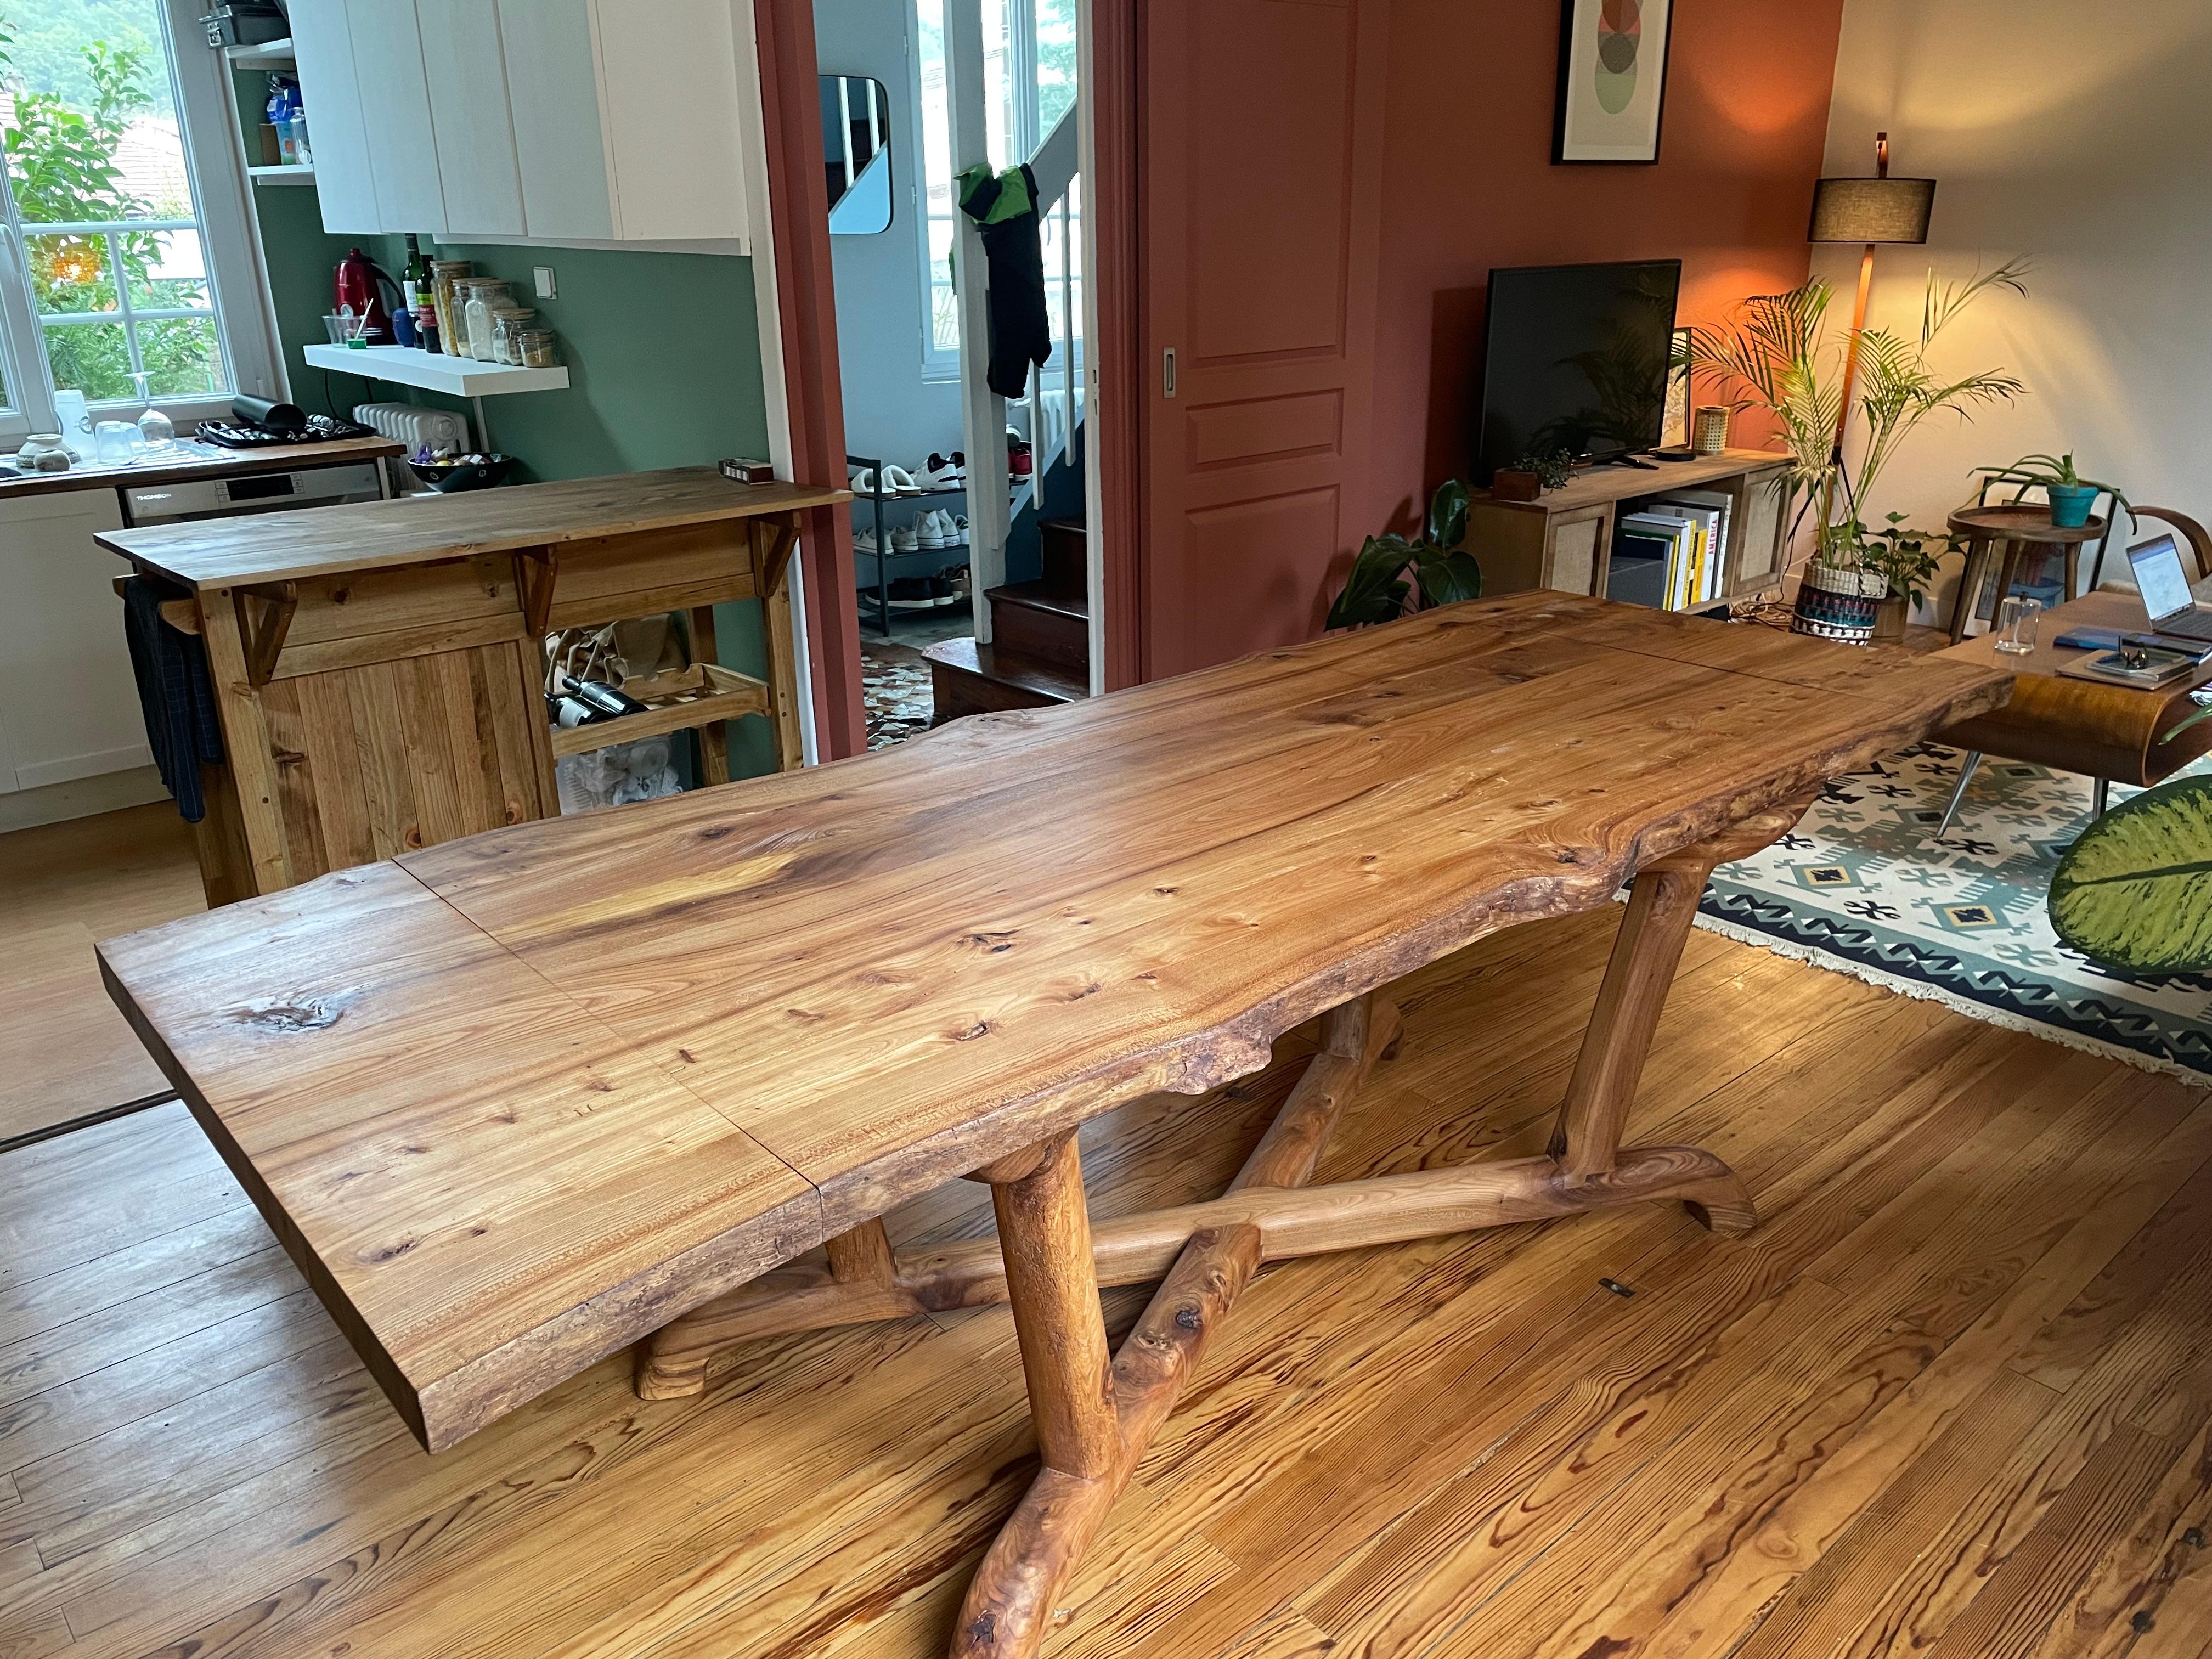 Woodwork Extendable Dining Table - Reclaimed Elm Wood For Sale